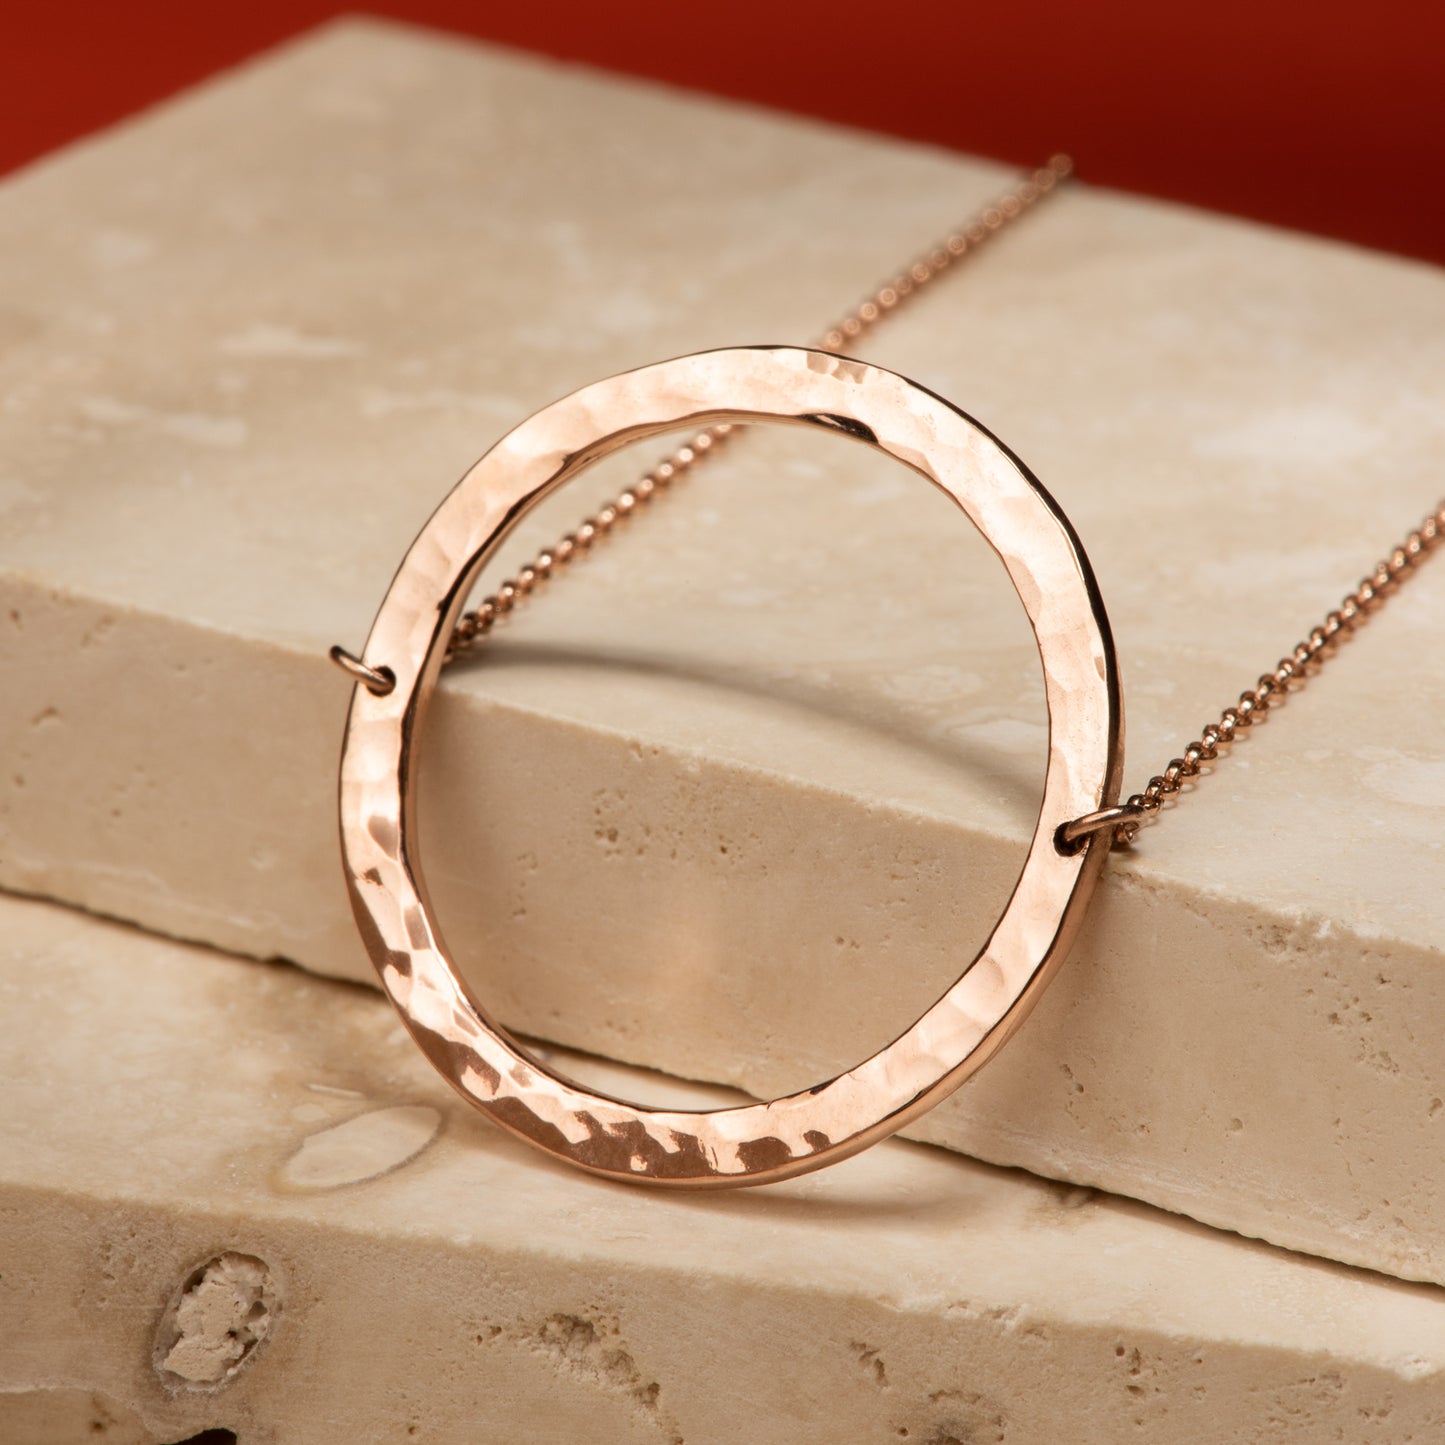 2.5 centimetre wide circular 10 karat recycled rose gold pendant with a hammer finish, attached to a 19" rolo chain.